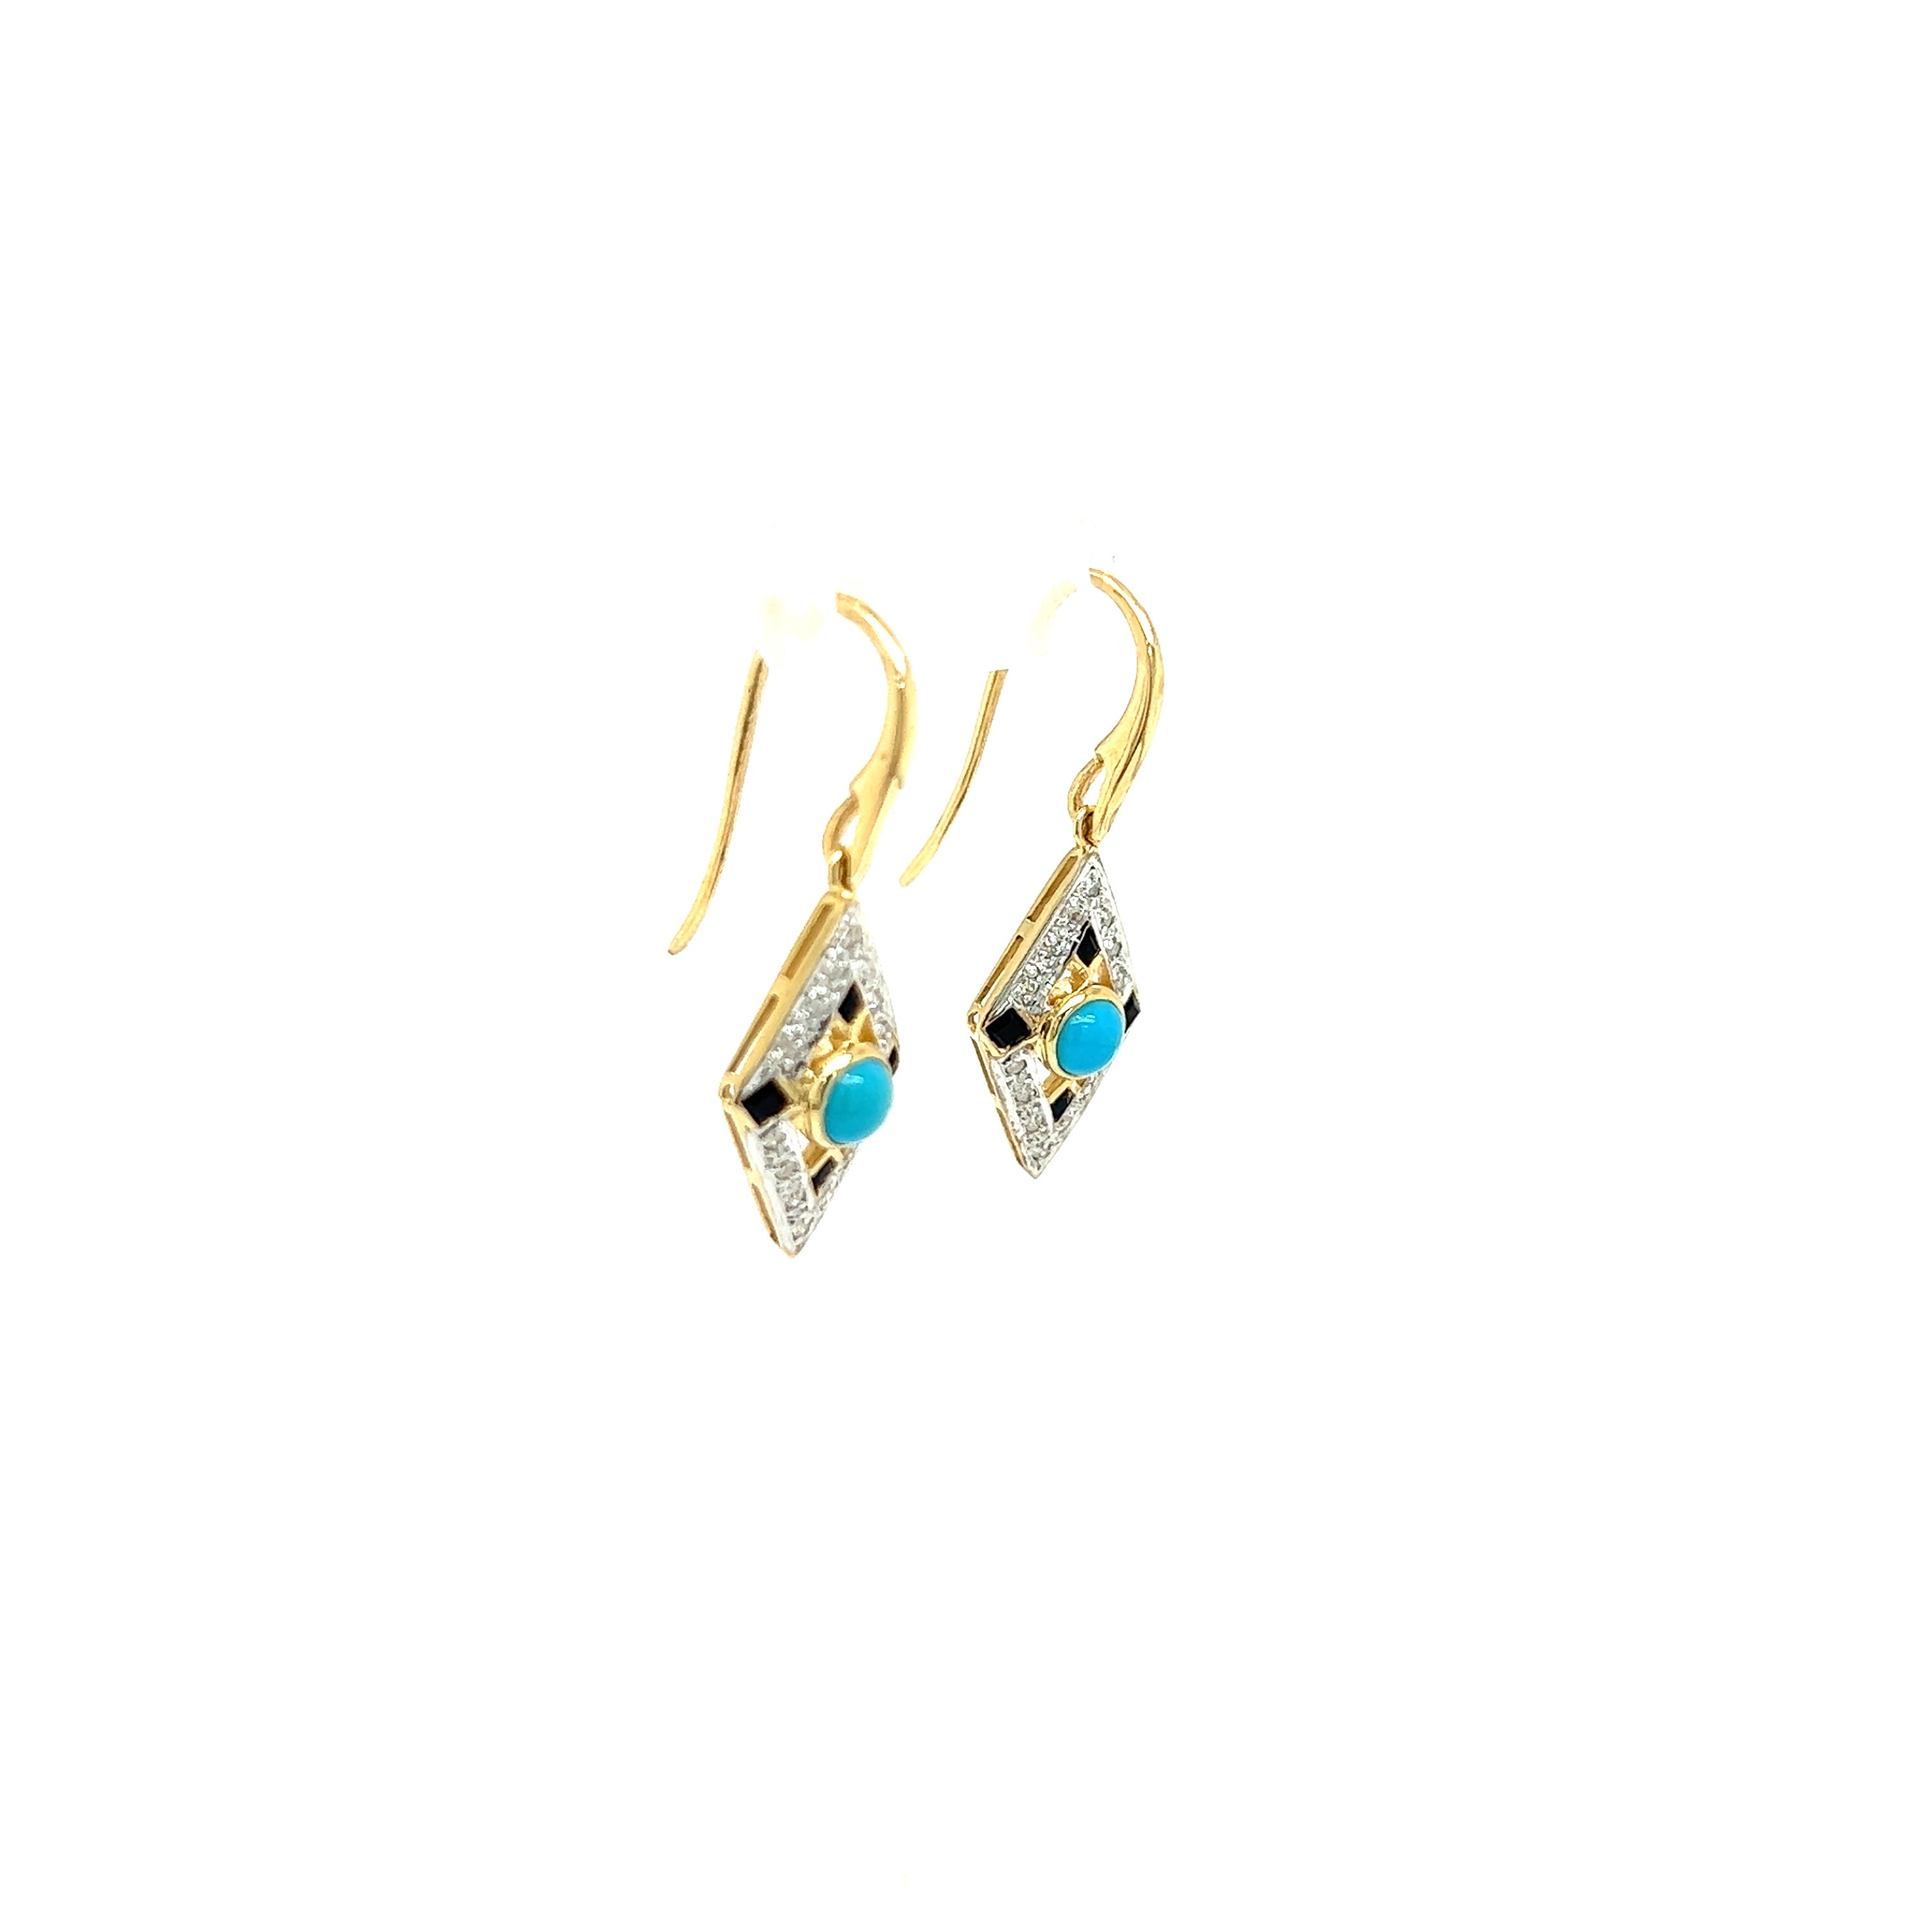 9ct yellow gold turquoise, onyx and diamond earrings.